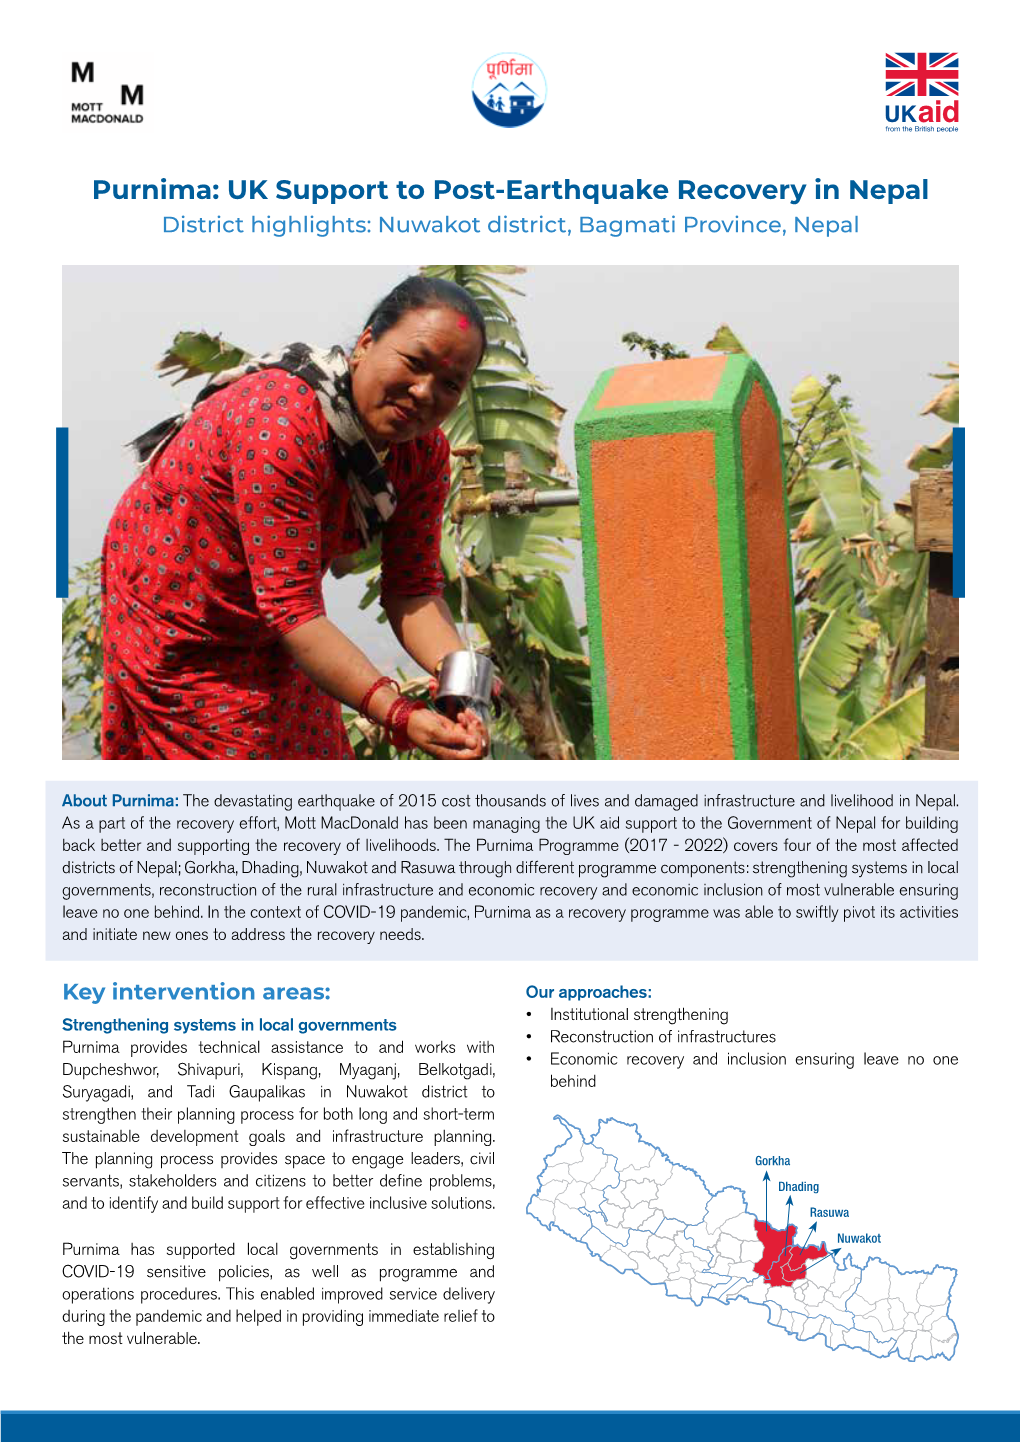 UK Support to Post-Earthquake Recovery in Nepal District Highlights: Nuwakot District, Bagmati Province, Nepal